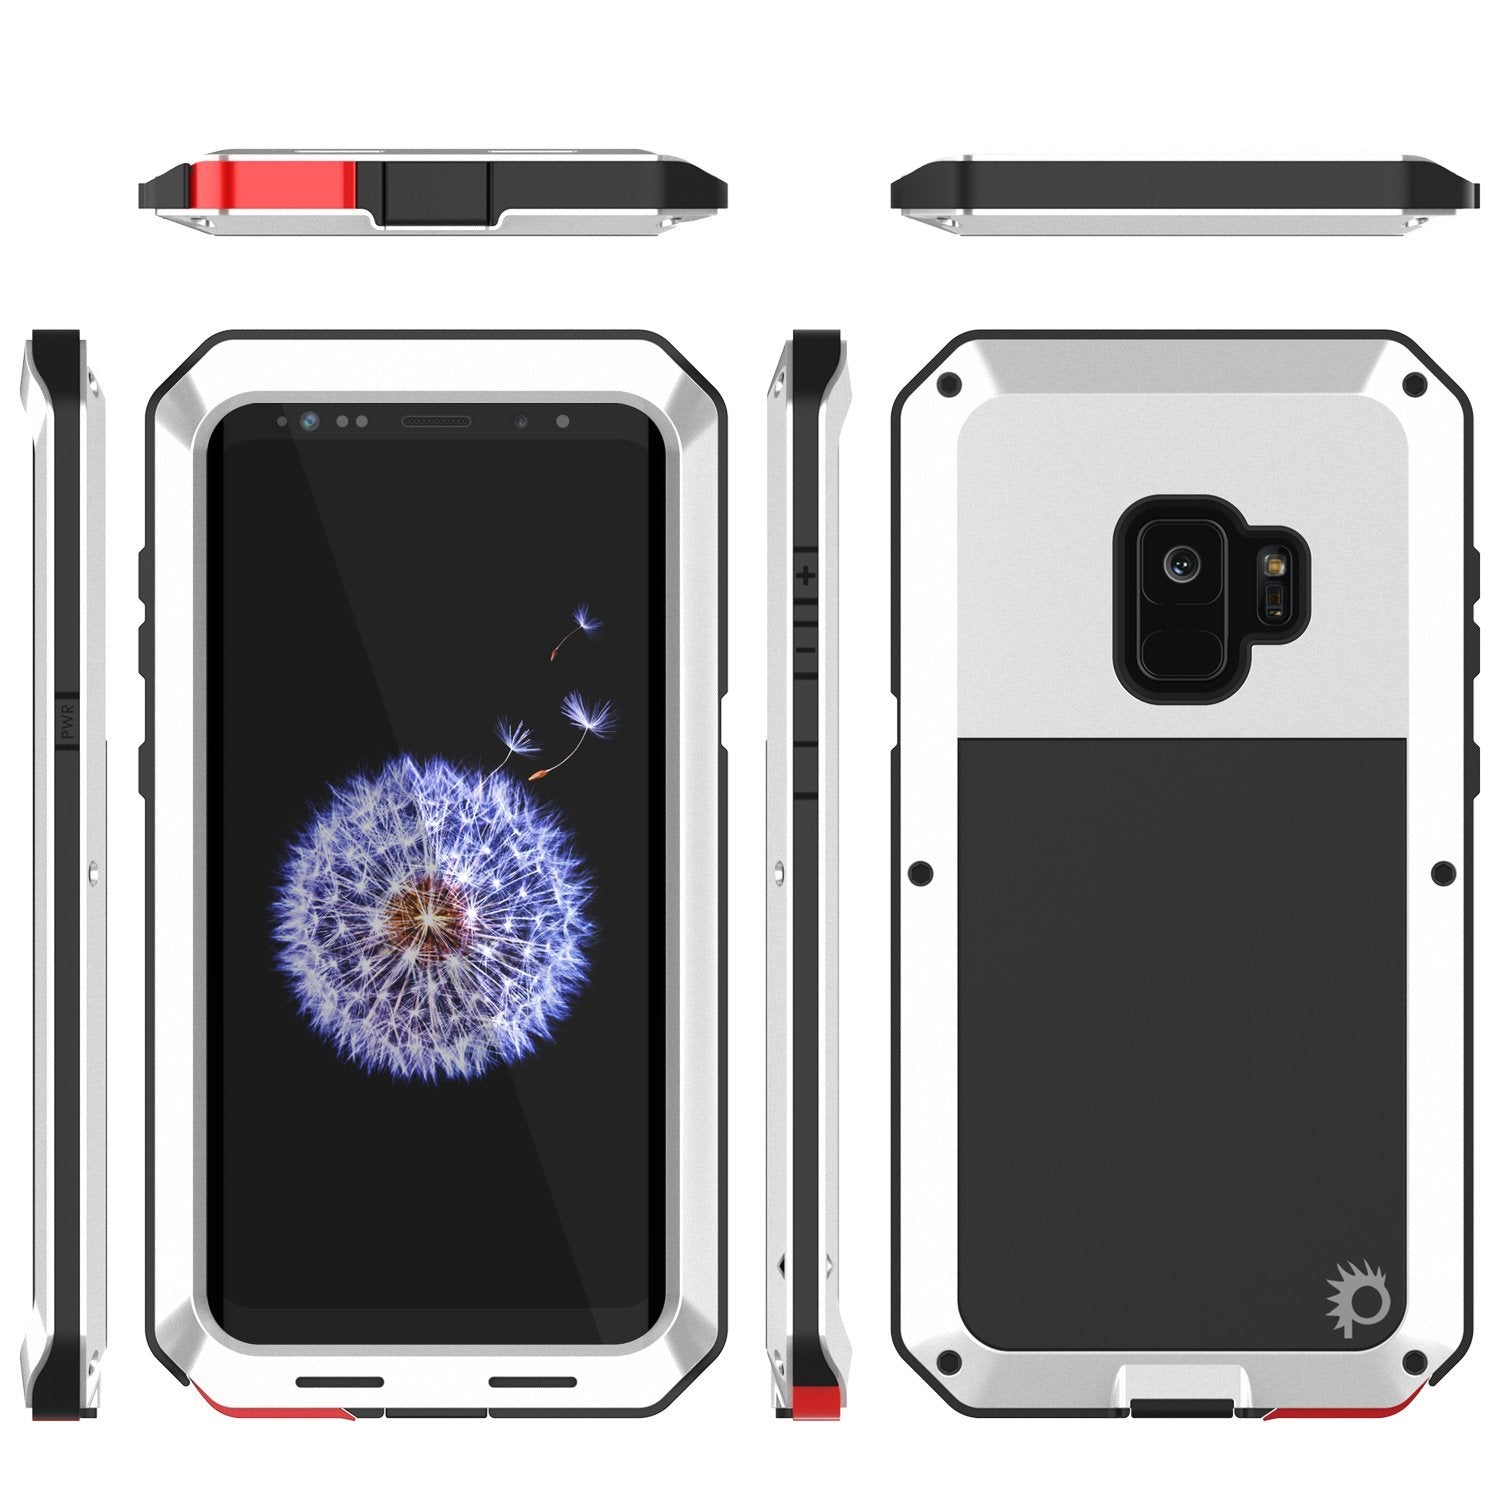 Galaxy S10 Metal Case, Heavy Duty Military Grade Rugged Armor Cover [White]